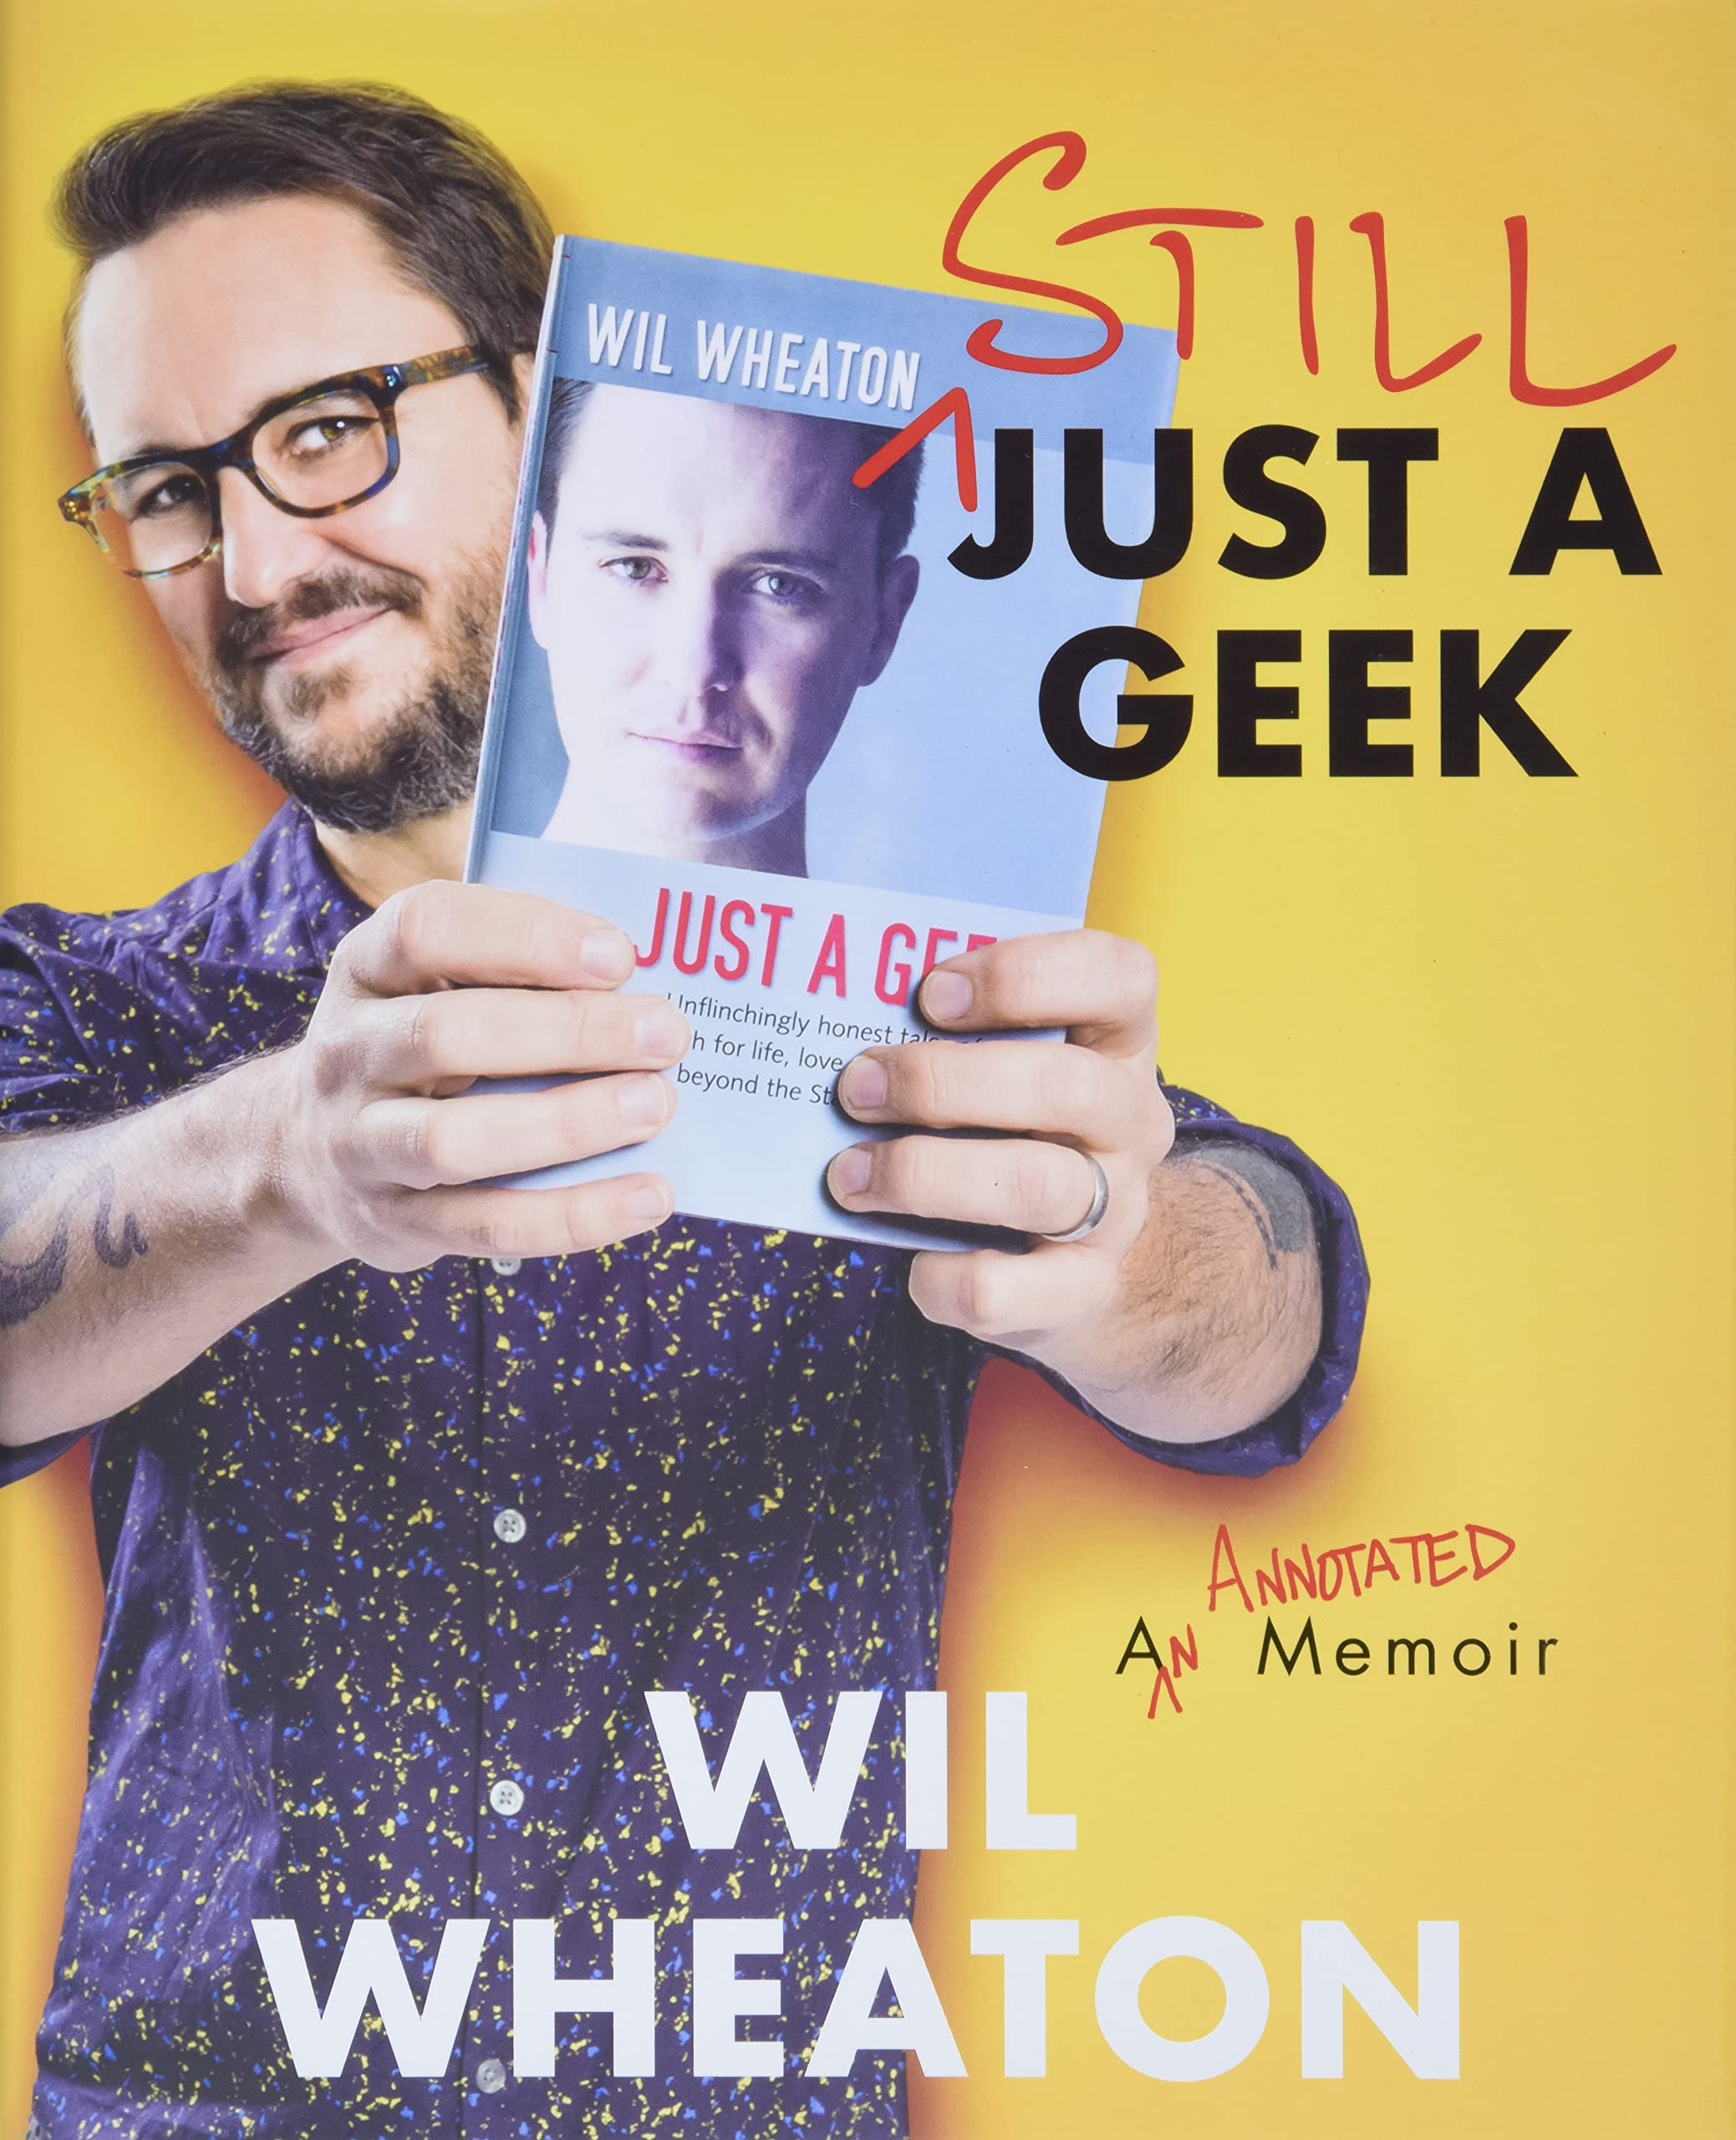 Image for "Still Just a Geek"